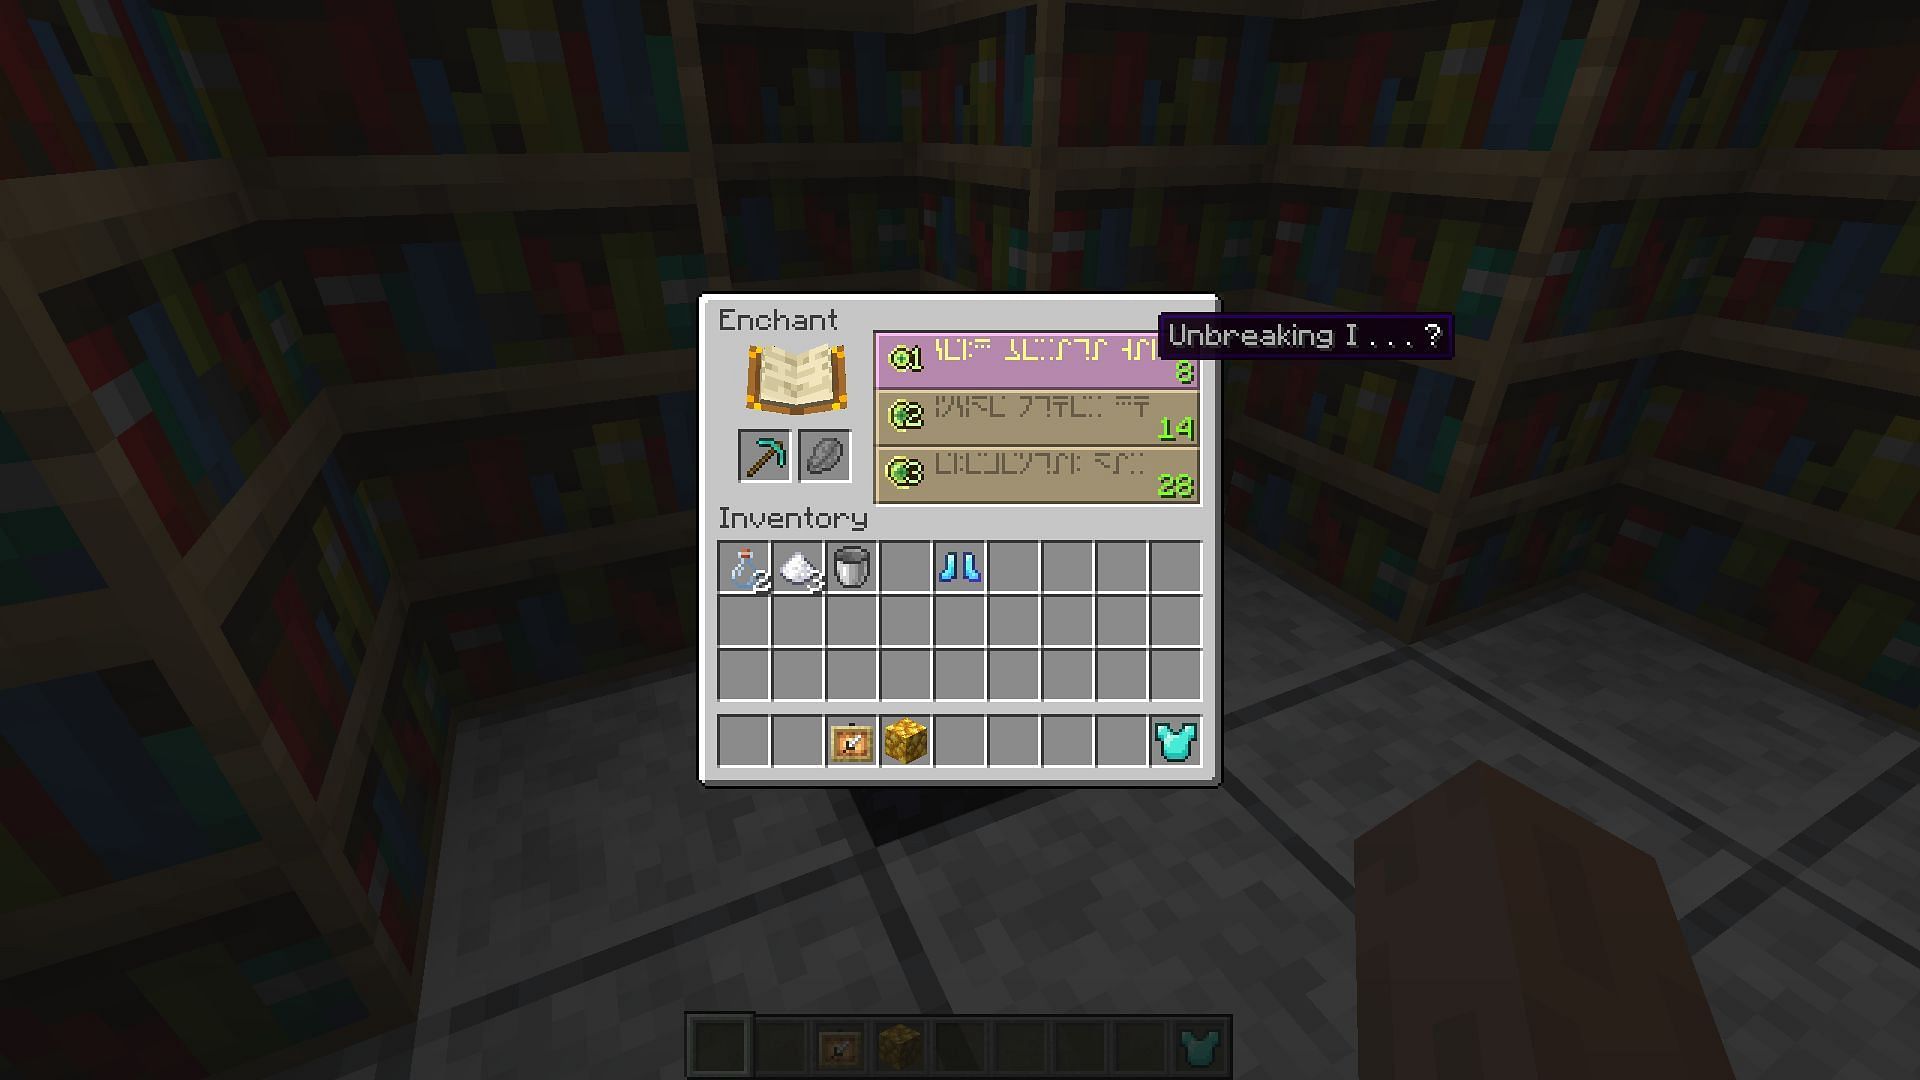 Unbreaking appearing in the enchanting table (Image via Minecraft)